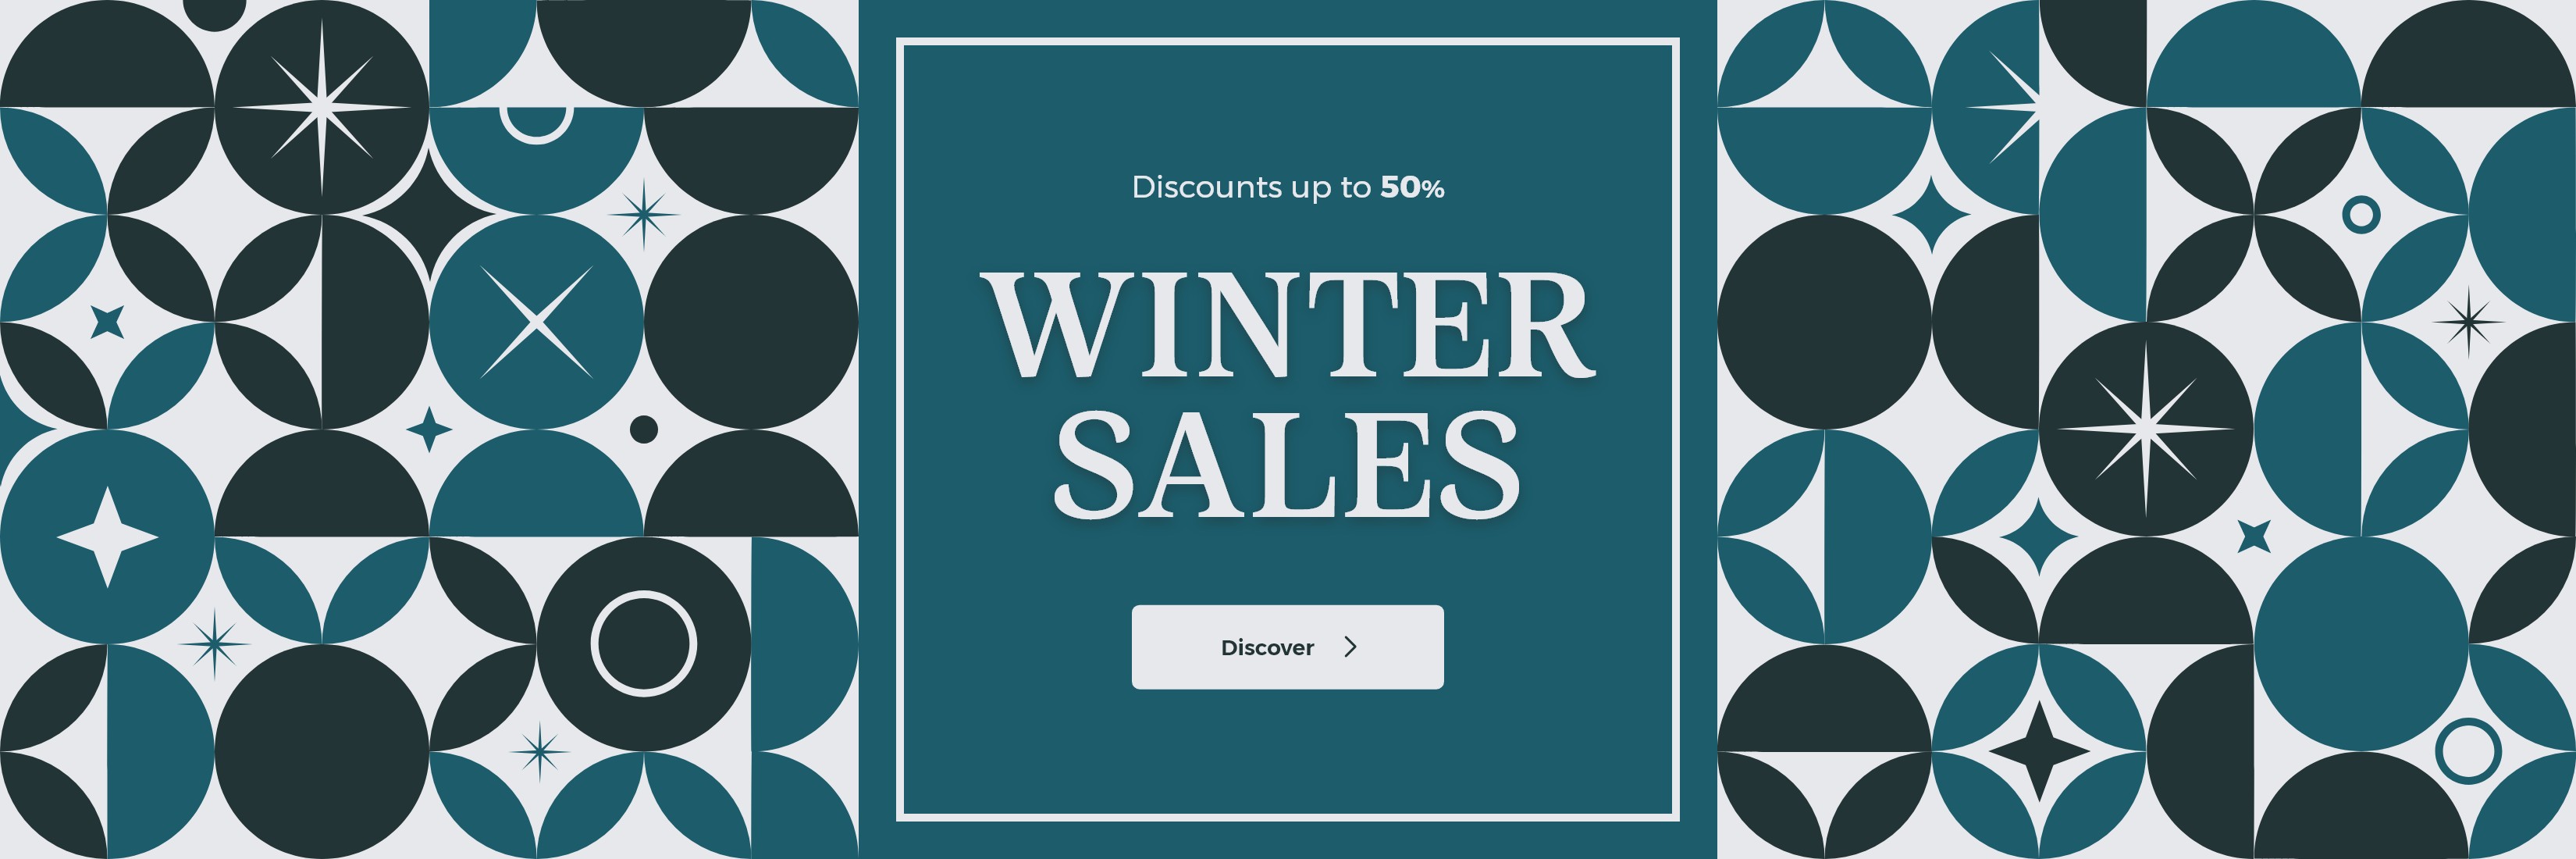 WINTER SALES UNTIL 50% OFF EXPIRES ON 31.01